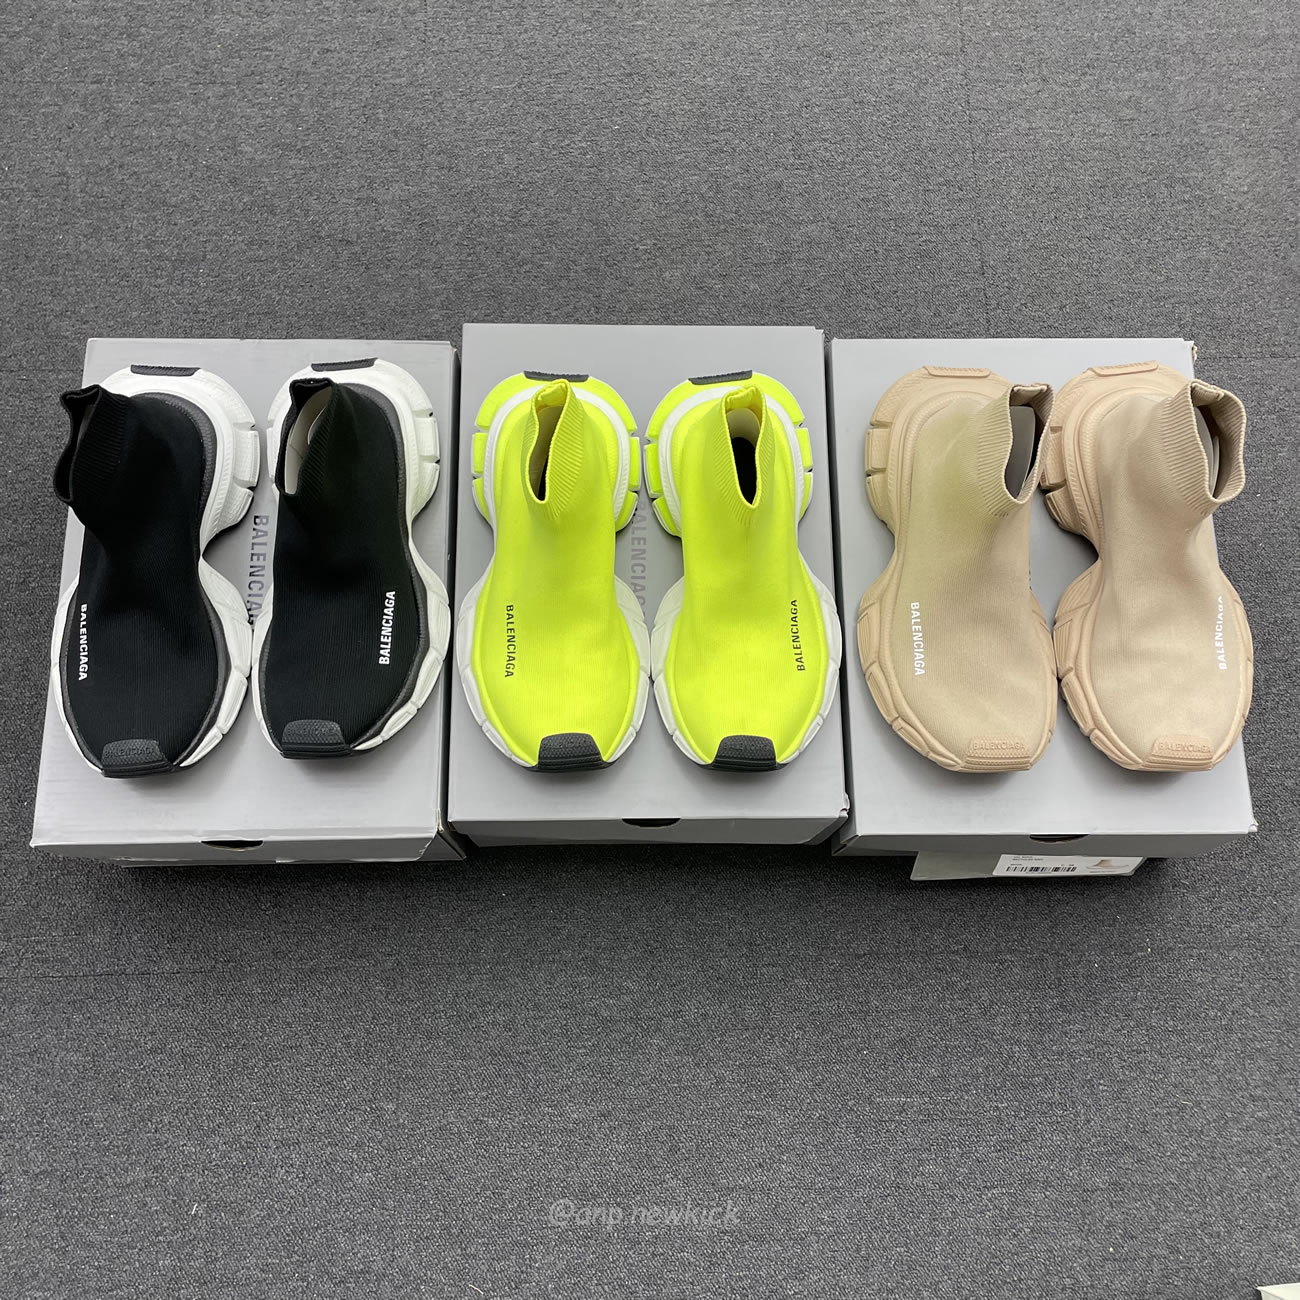 Balenciaga 3xl Sock Recycled Knit Sneakers Black White Fluo Yellow Beige (16) - newkick.org